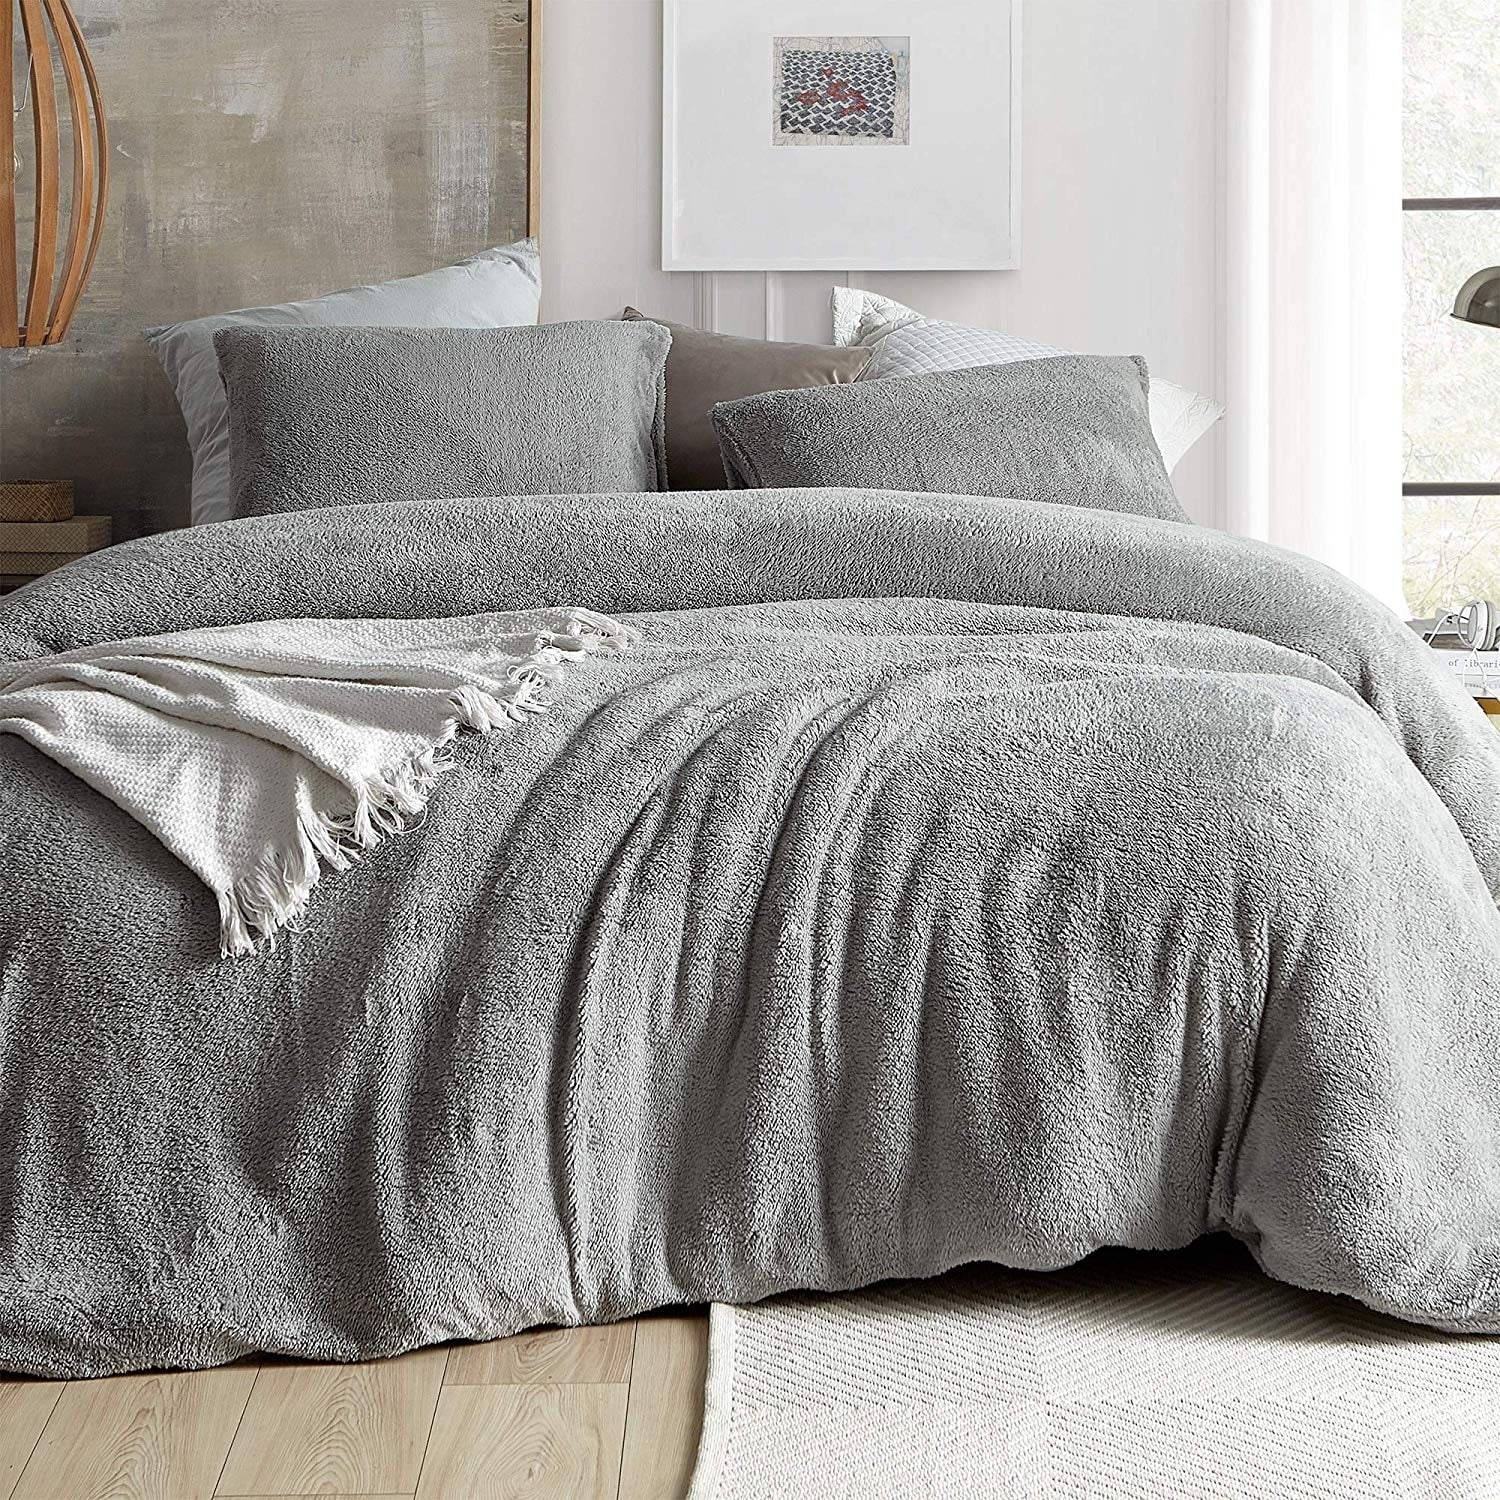 Coma Inducer Duvet Cover Teddy Bear Silver Gray On Sale Overstock 29628638 Twin Xl Silver Gray